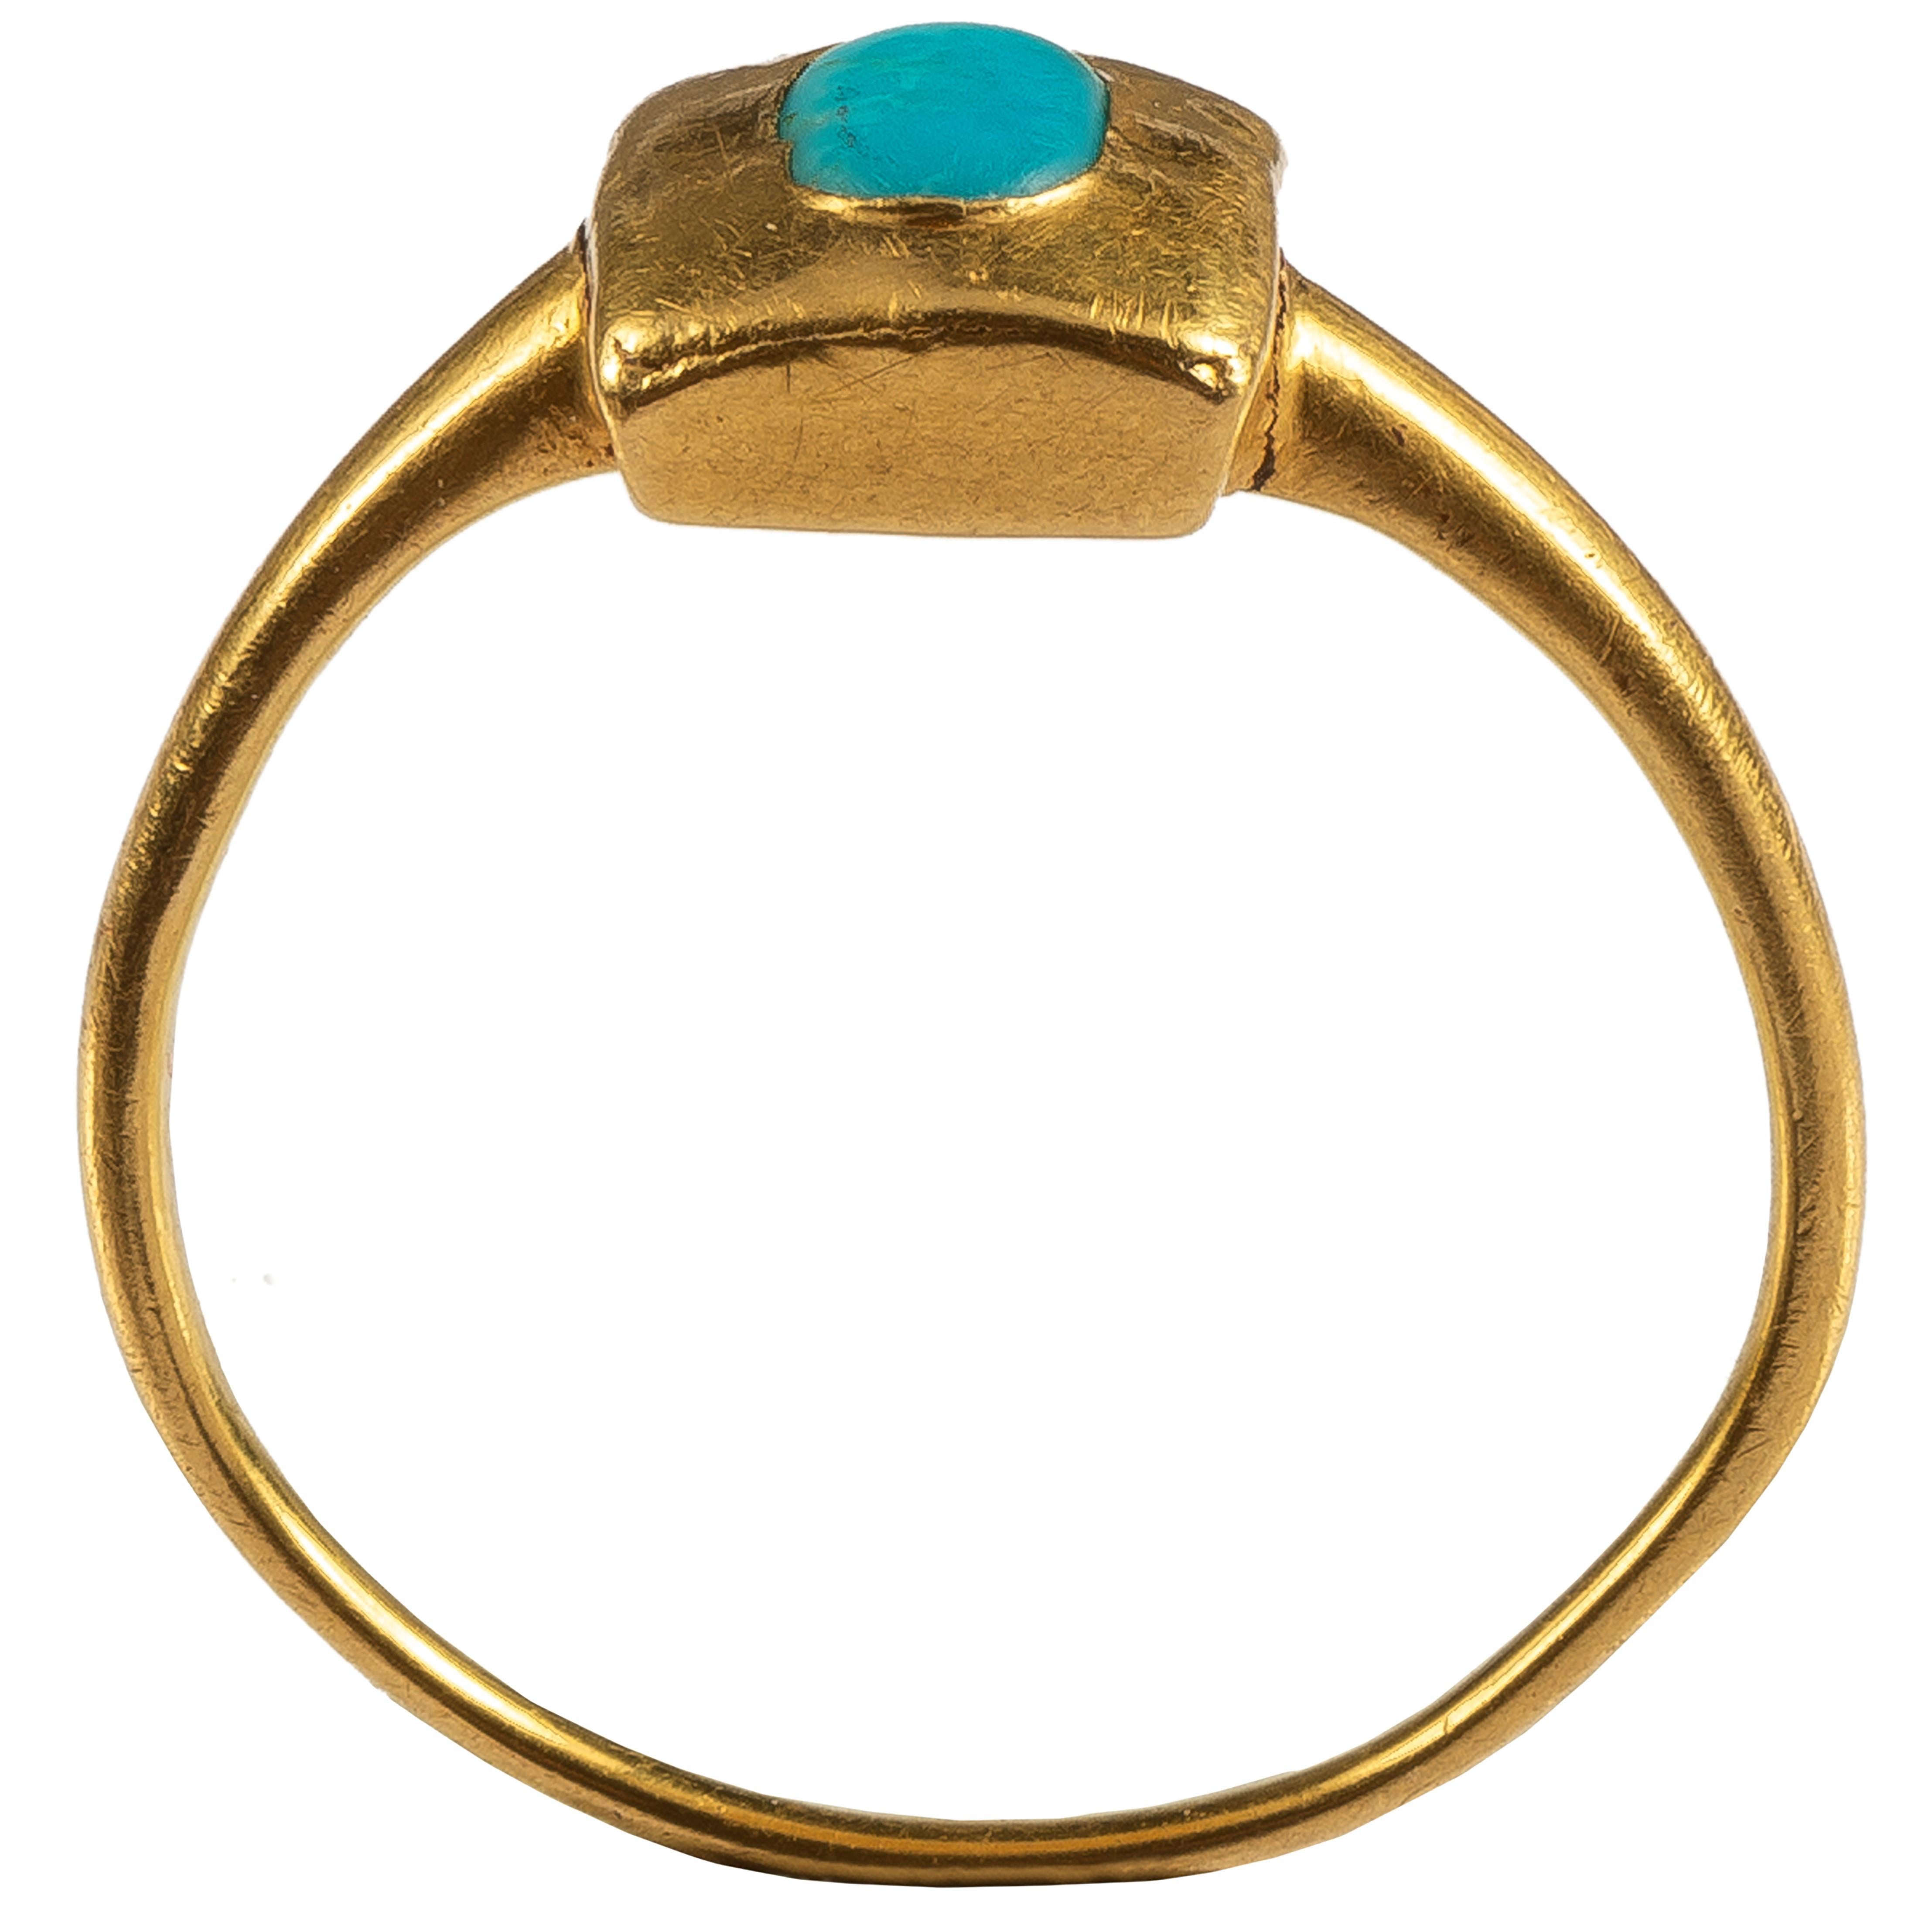 Antique Gold Renaissance Ring with Turquoise Cabochon 3